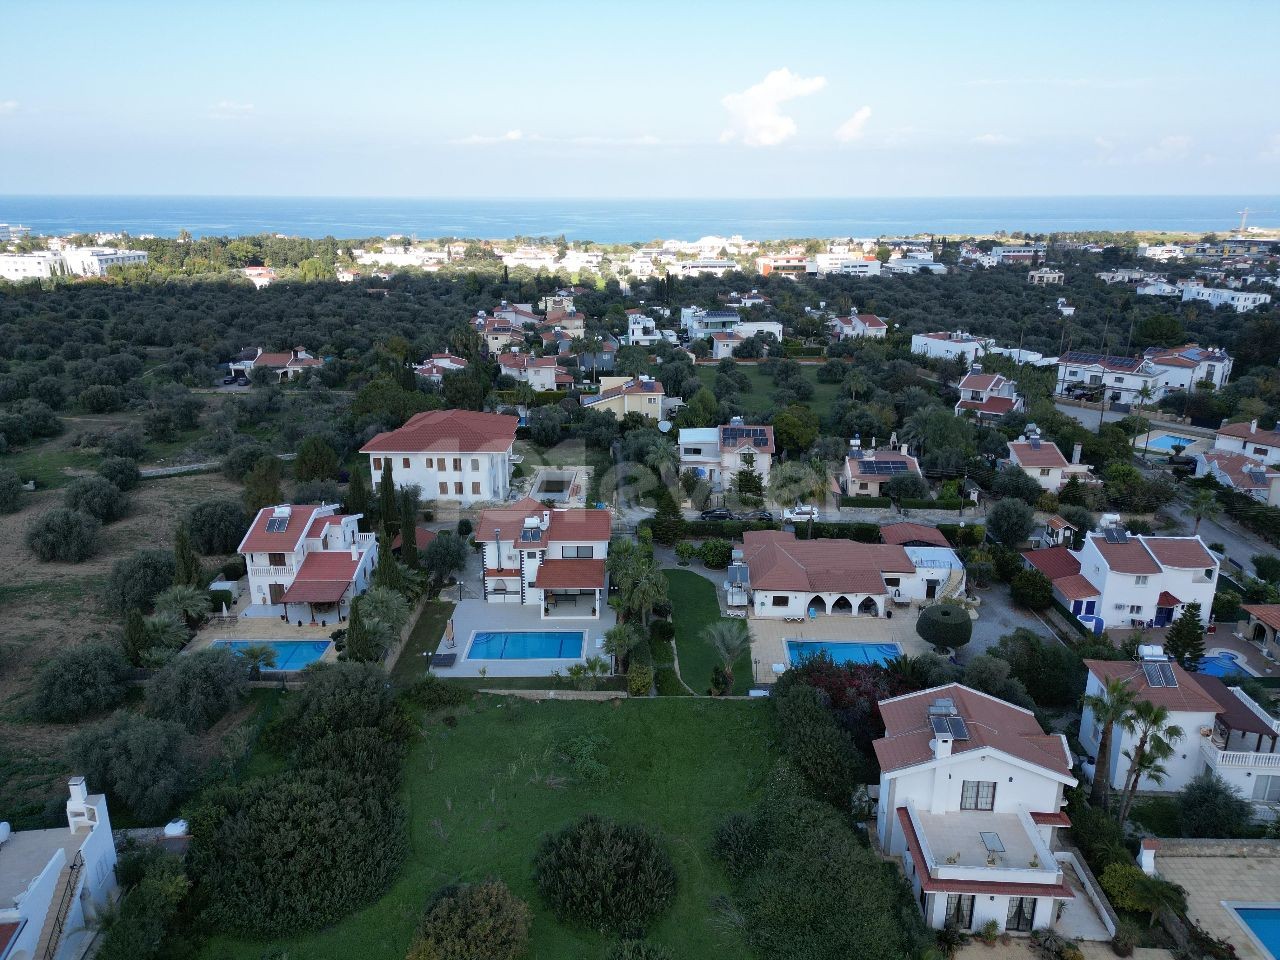 VILLA PROJECT APPROVED LAND FOR SALE IN OZANKÖY, GIRNE!!